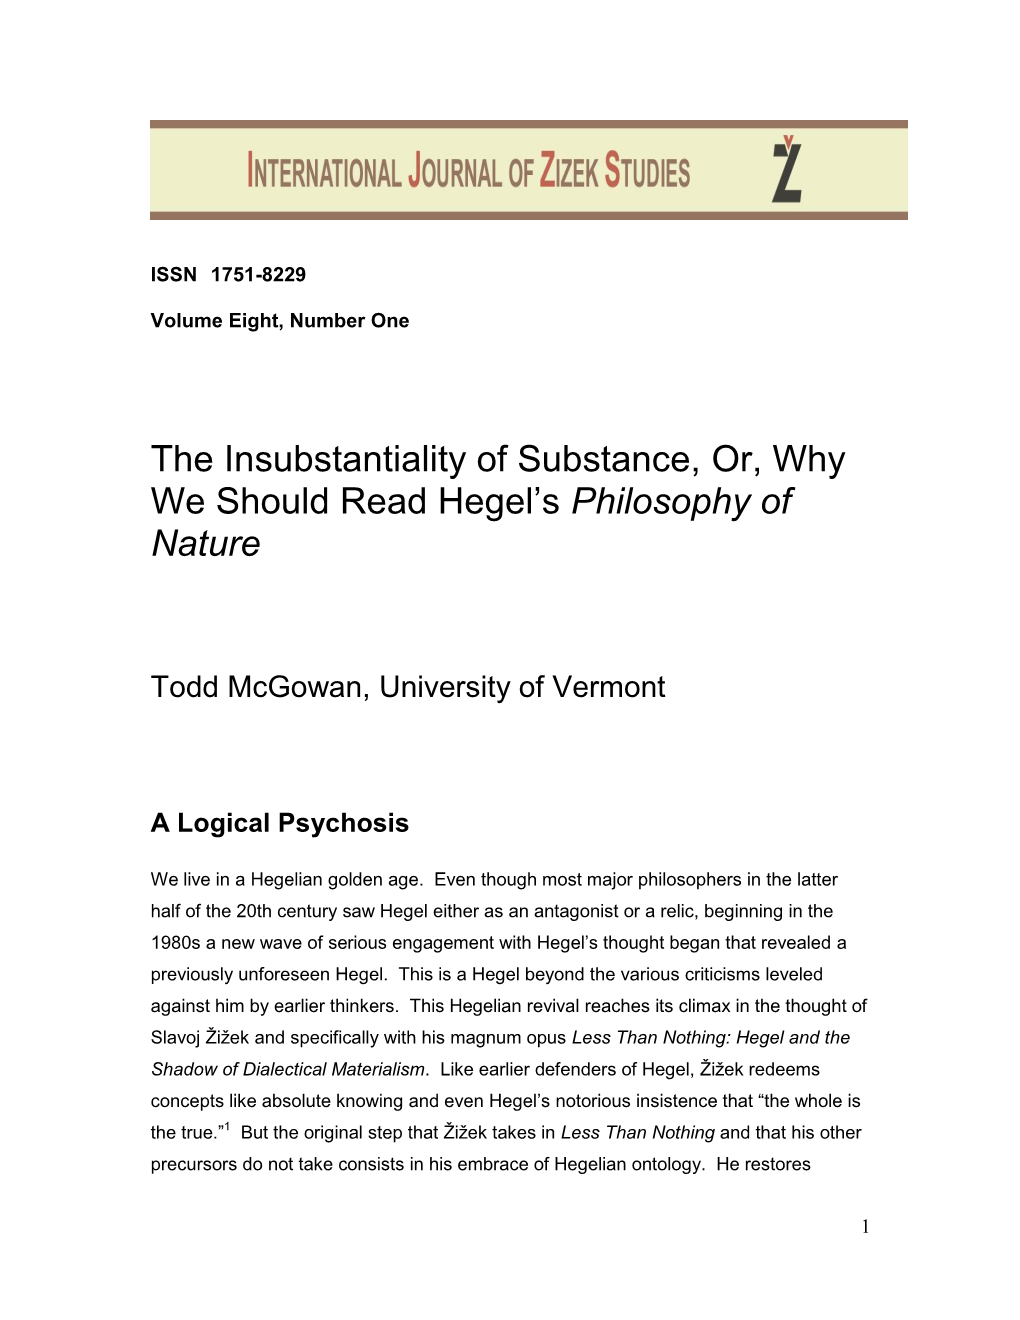 The Insubstantiality of Substance, Or, Why We Should Read Hegel's